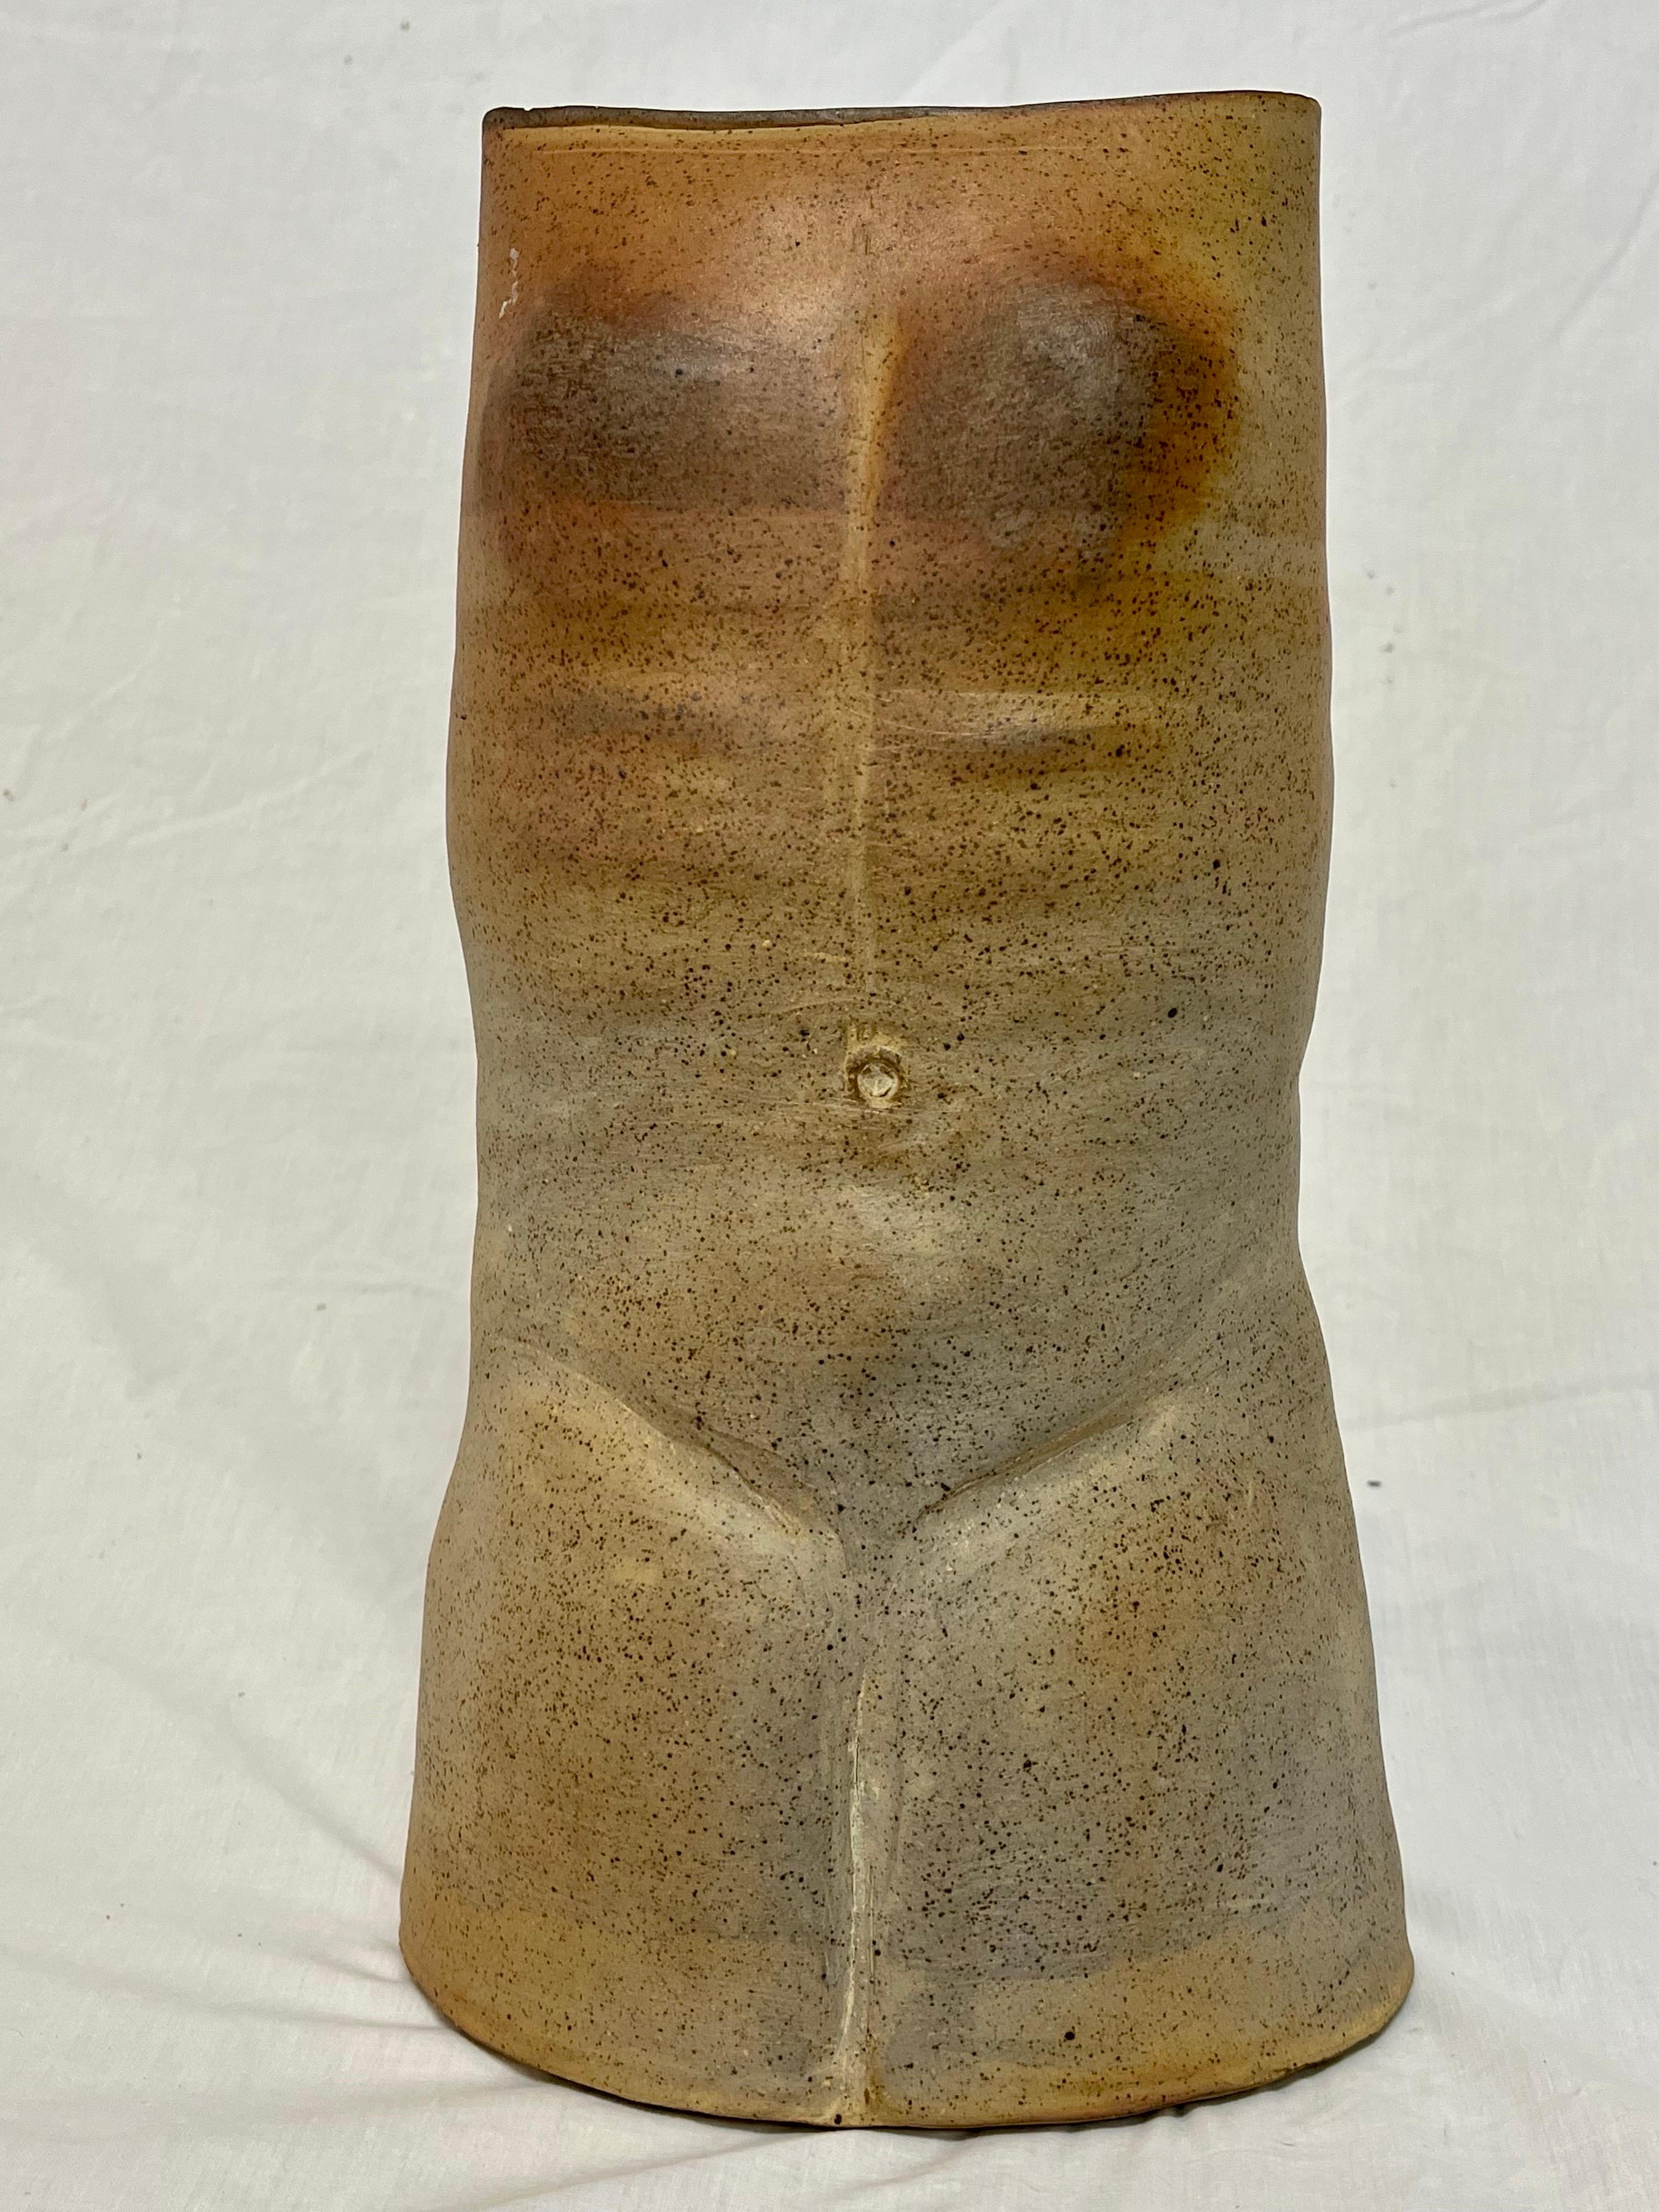 An impressive androgynous nude torso sculpture presented as a vase or vessel. The idea that this figurative representation of the human form is given as a vase allows the viewer to place or fill the beauty they have within the sculpture, within the